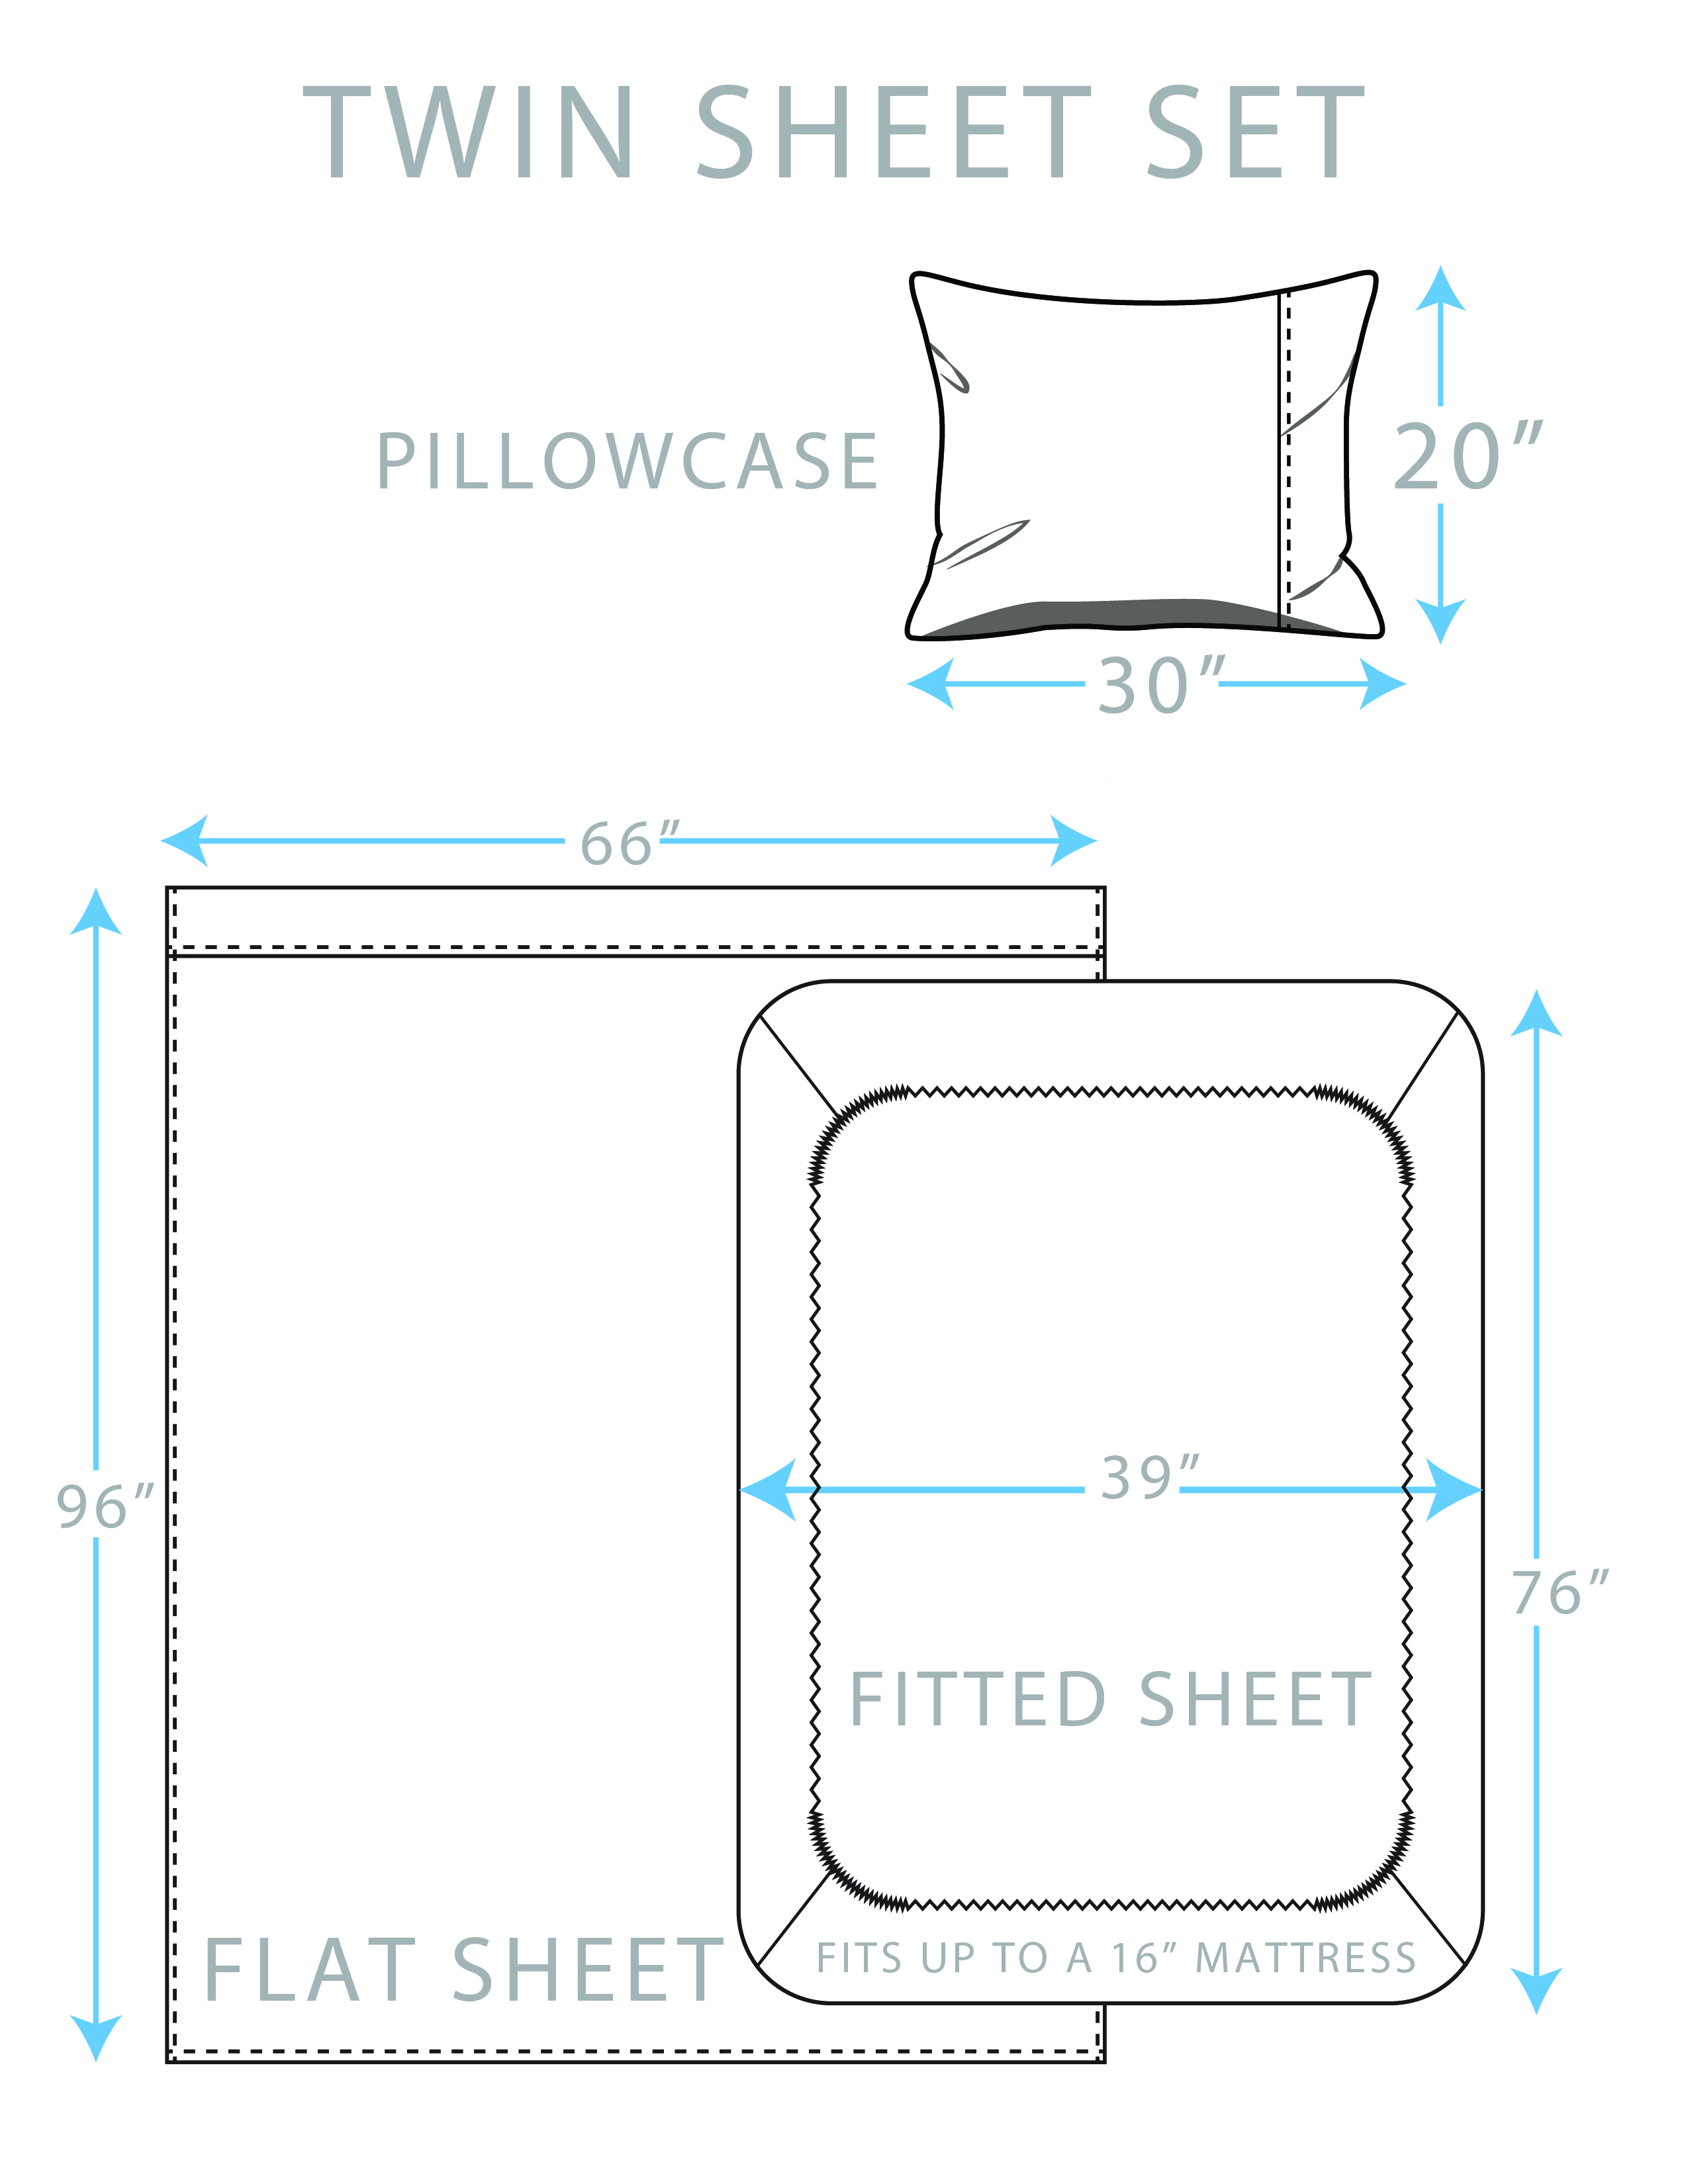 Soft Tees Luxury Cotton Modal Ultra Soft Jersey Knit Sheet Set by Royale Linens - image 3 of 10